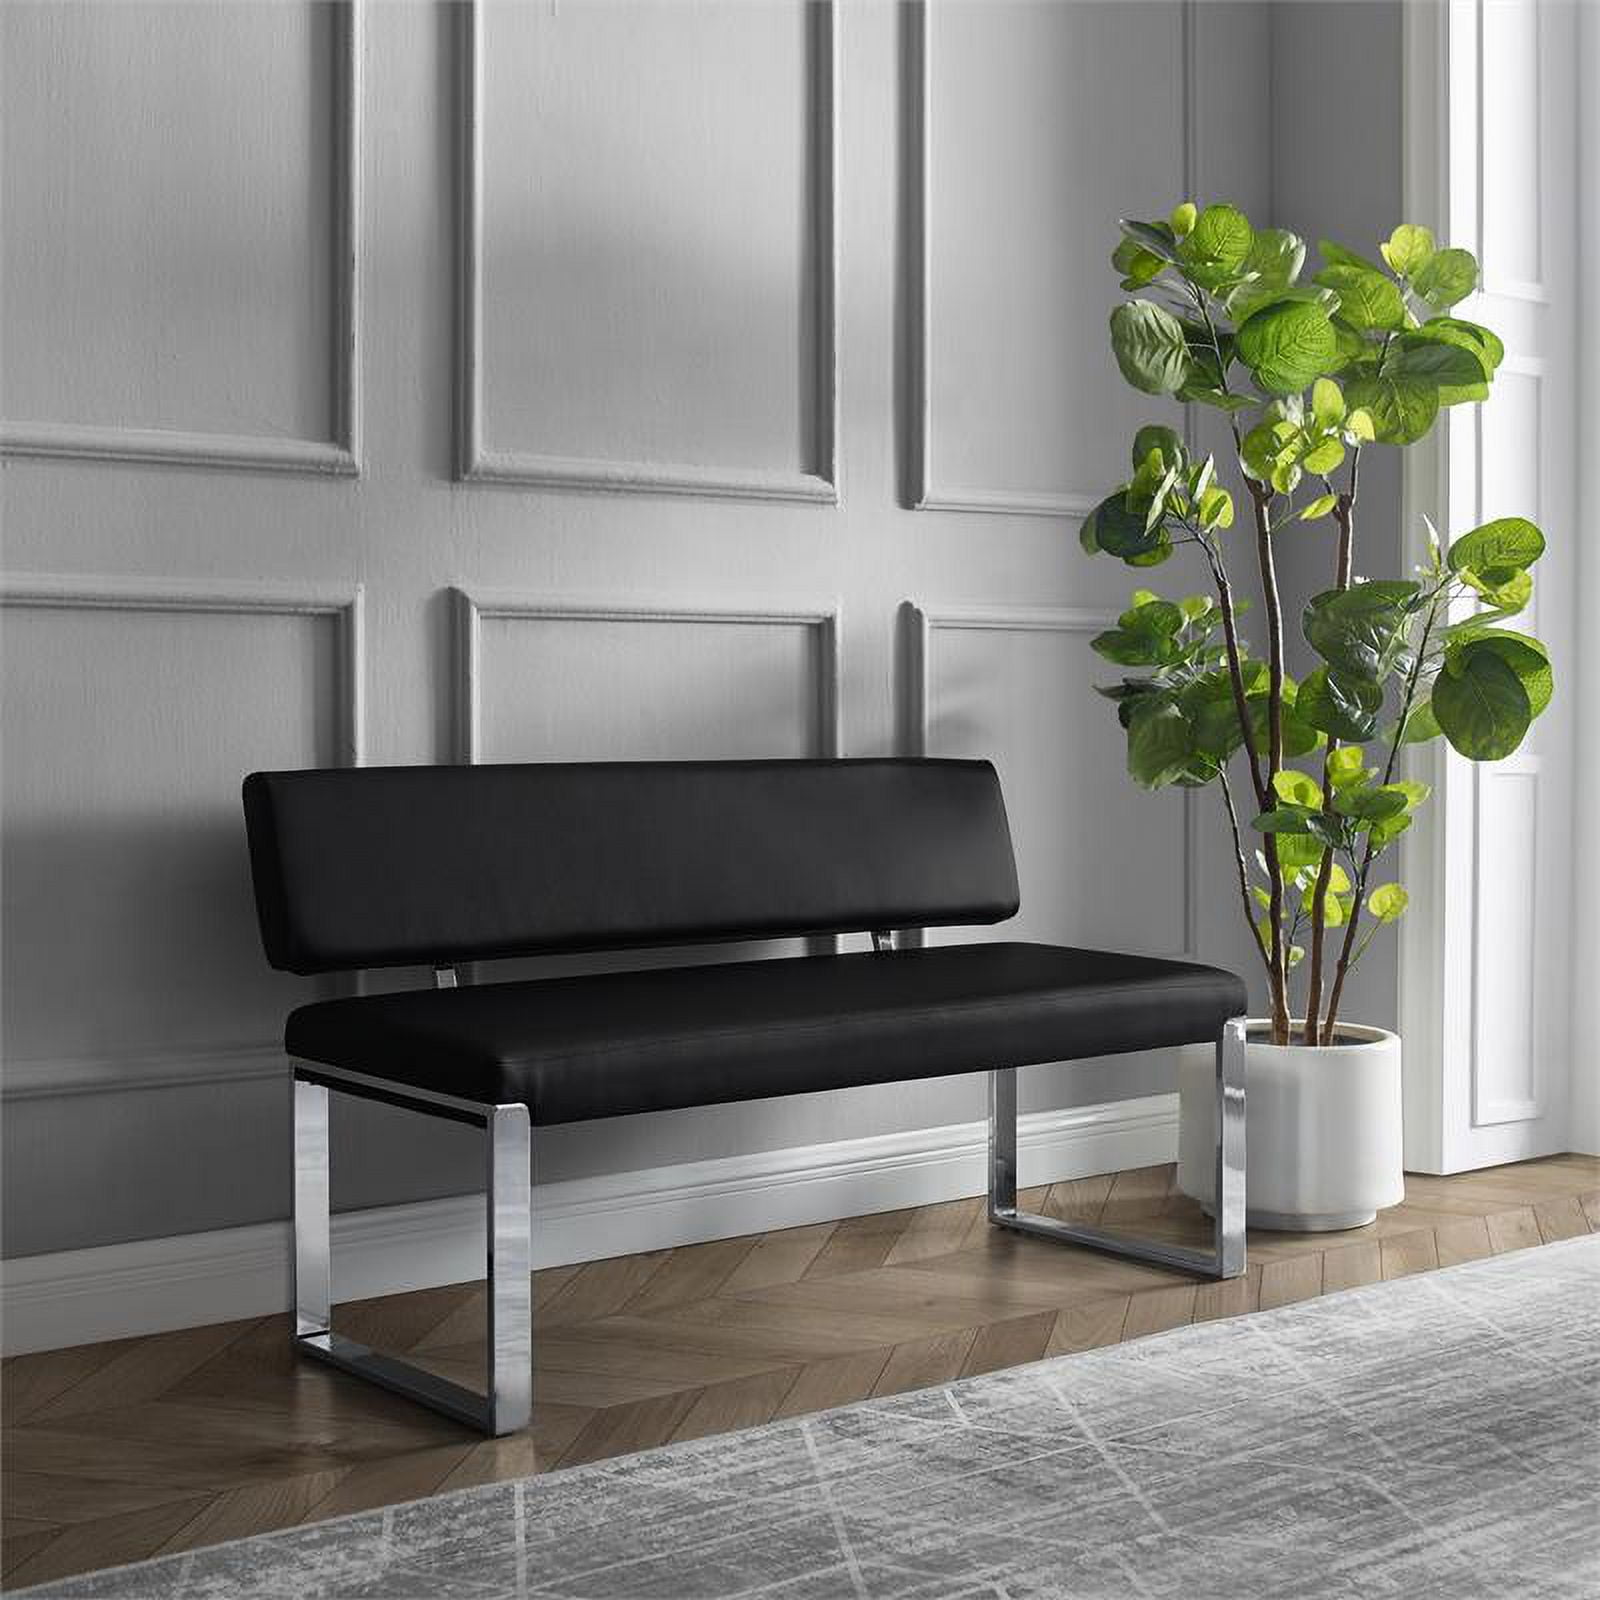 Leather Mabel Posh Bench BH208-01BN-UE Legs, Chrome with Rectangular Upholstered Brown Faux Living